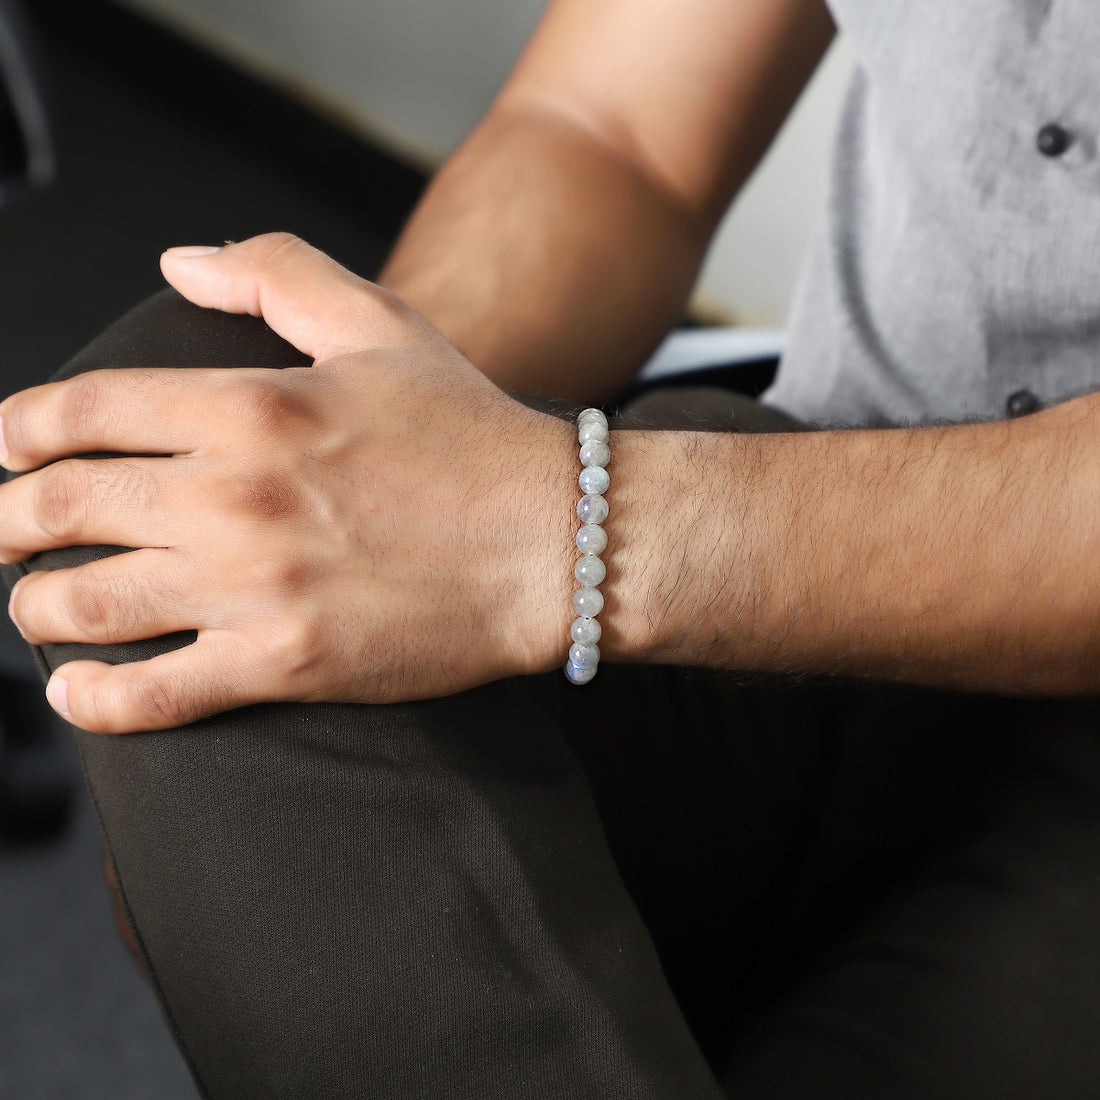 A close-up view of a bracelet made with smooth round labradorite gemstone beads, showcasing their captivating gray hues.